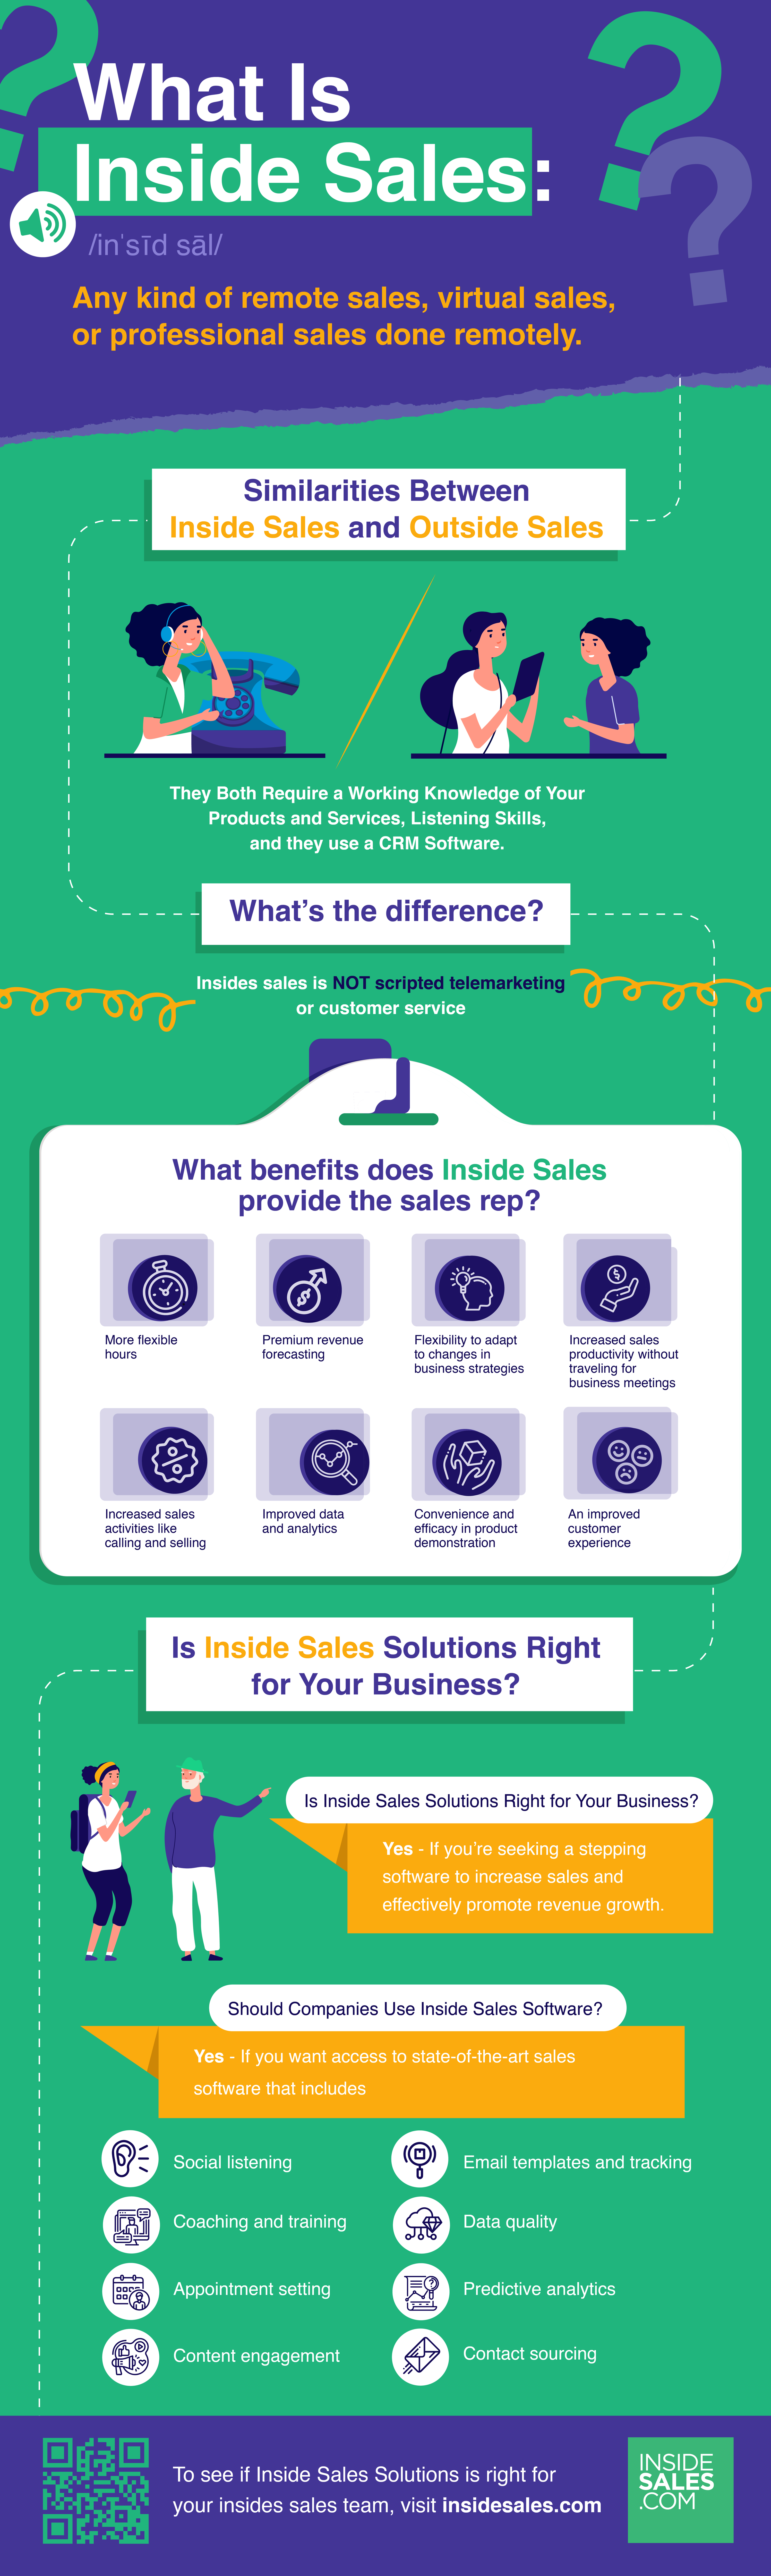 What Is Inside Sales? — Our Definition Of Inside Sales [INFOGRAPHIC]